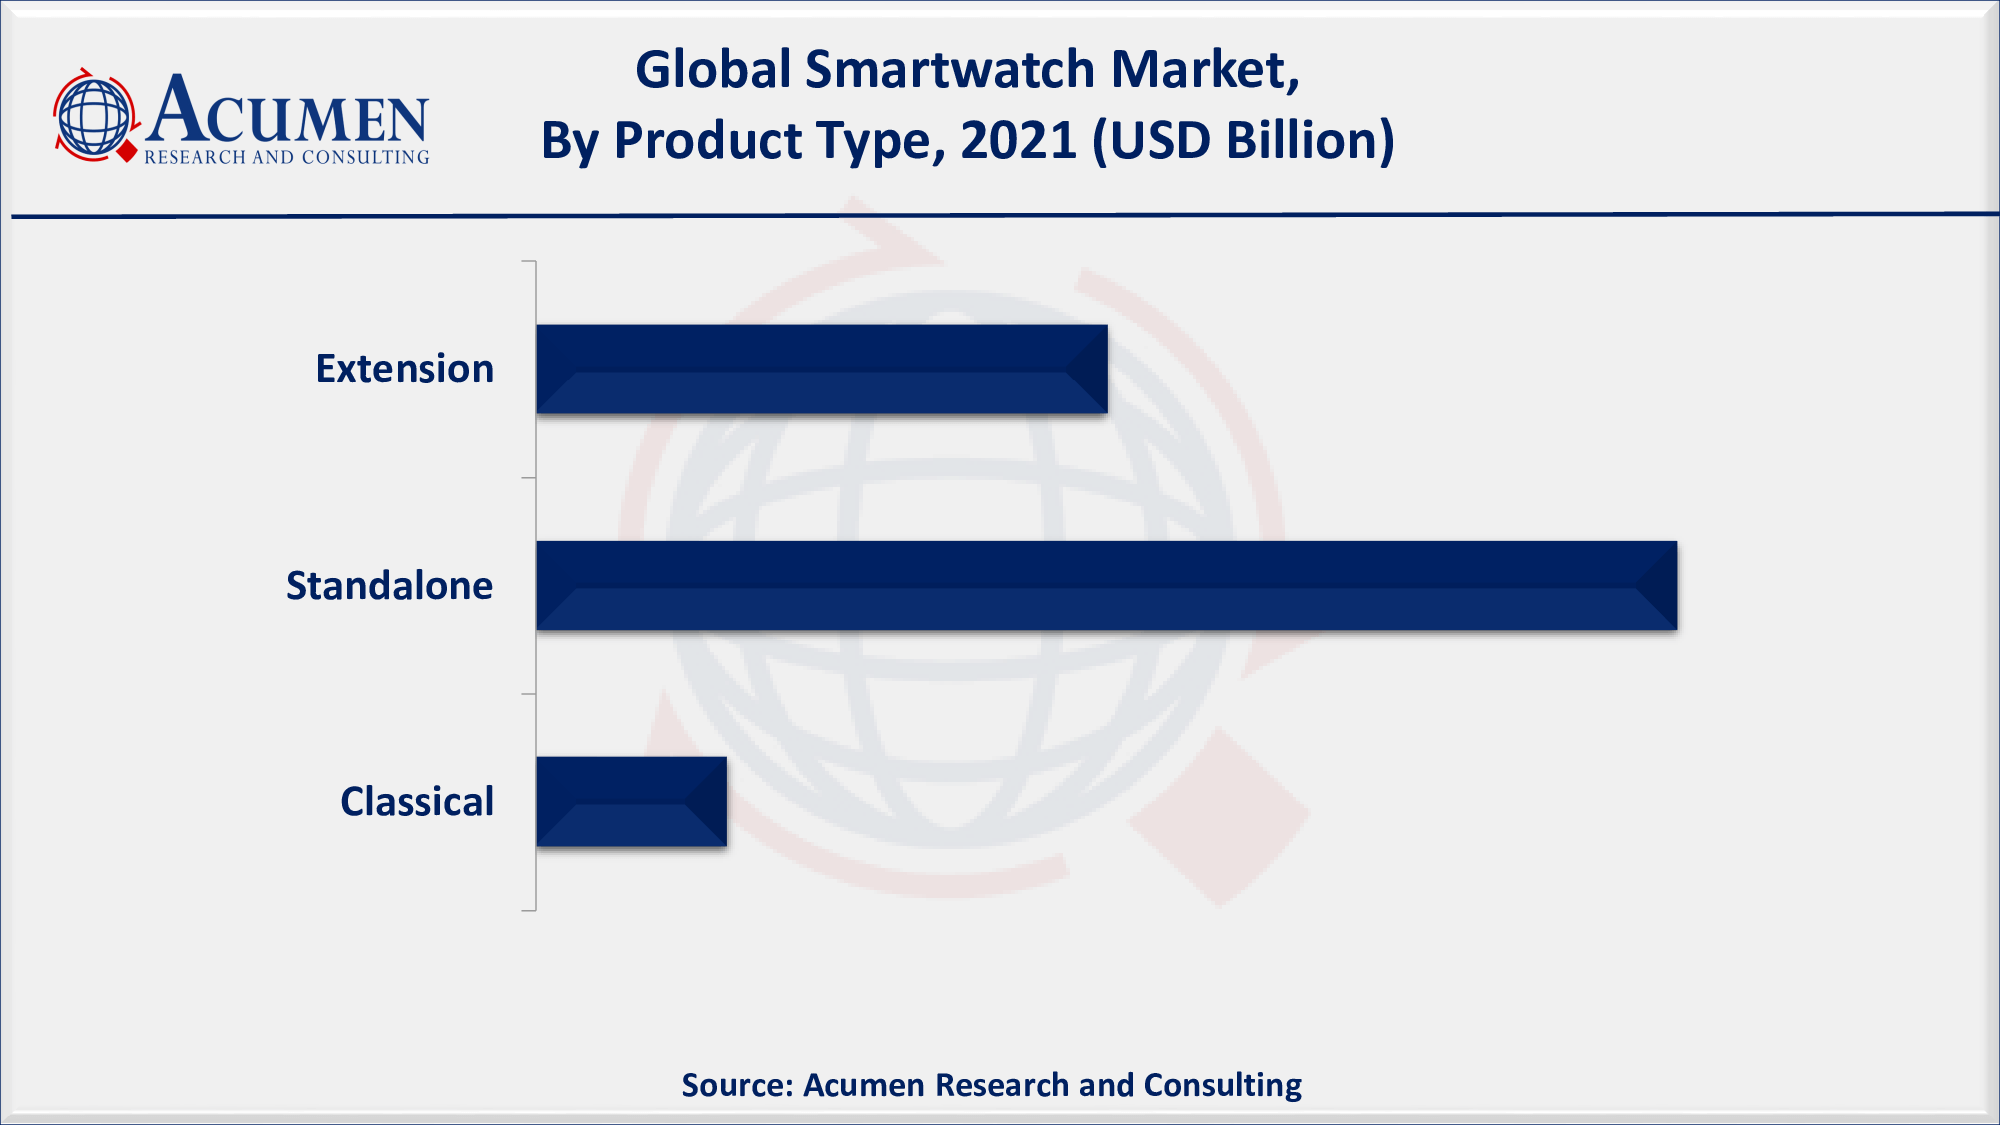 Based on product type segment, standalone attained more than 60% of the total market share in 2021